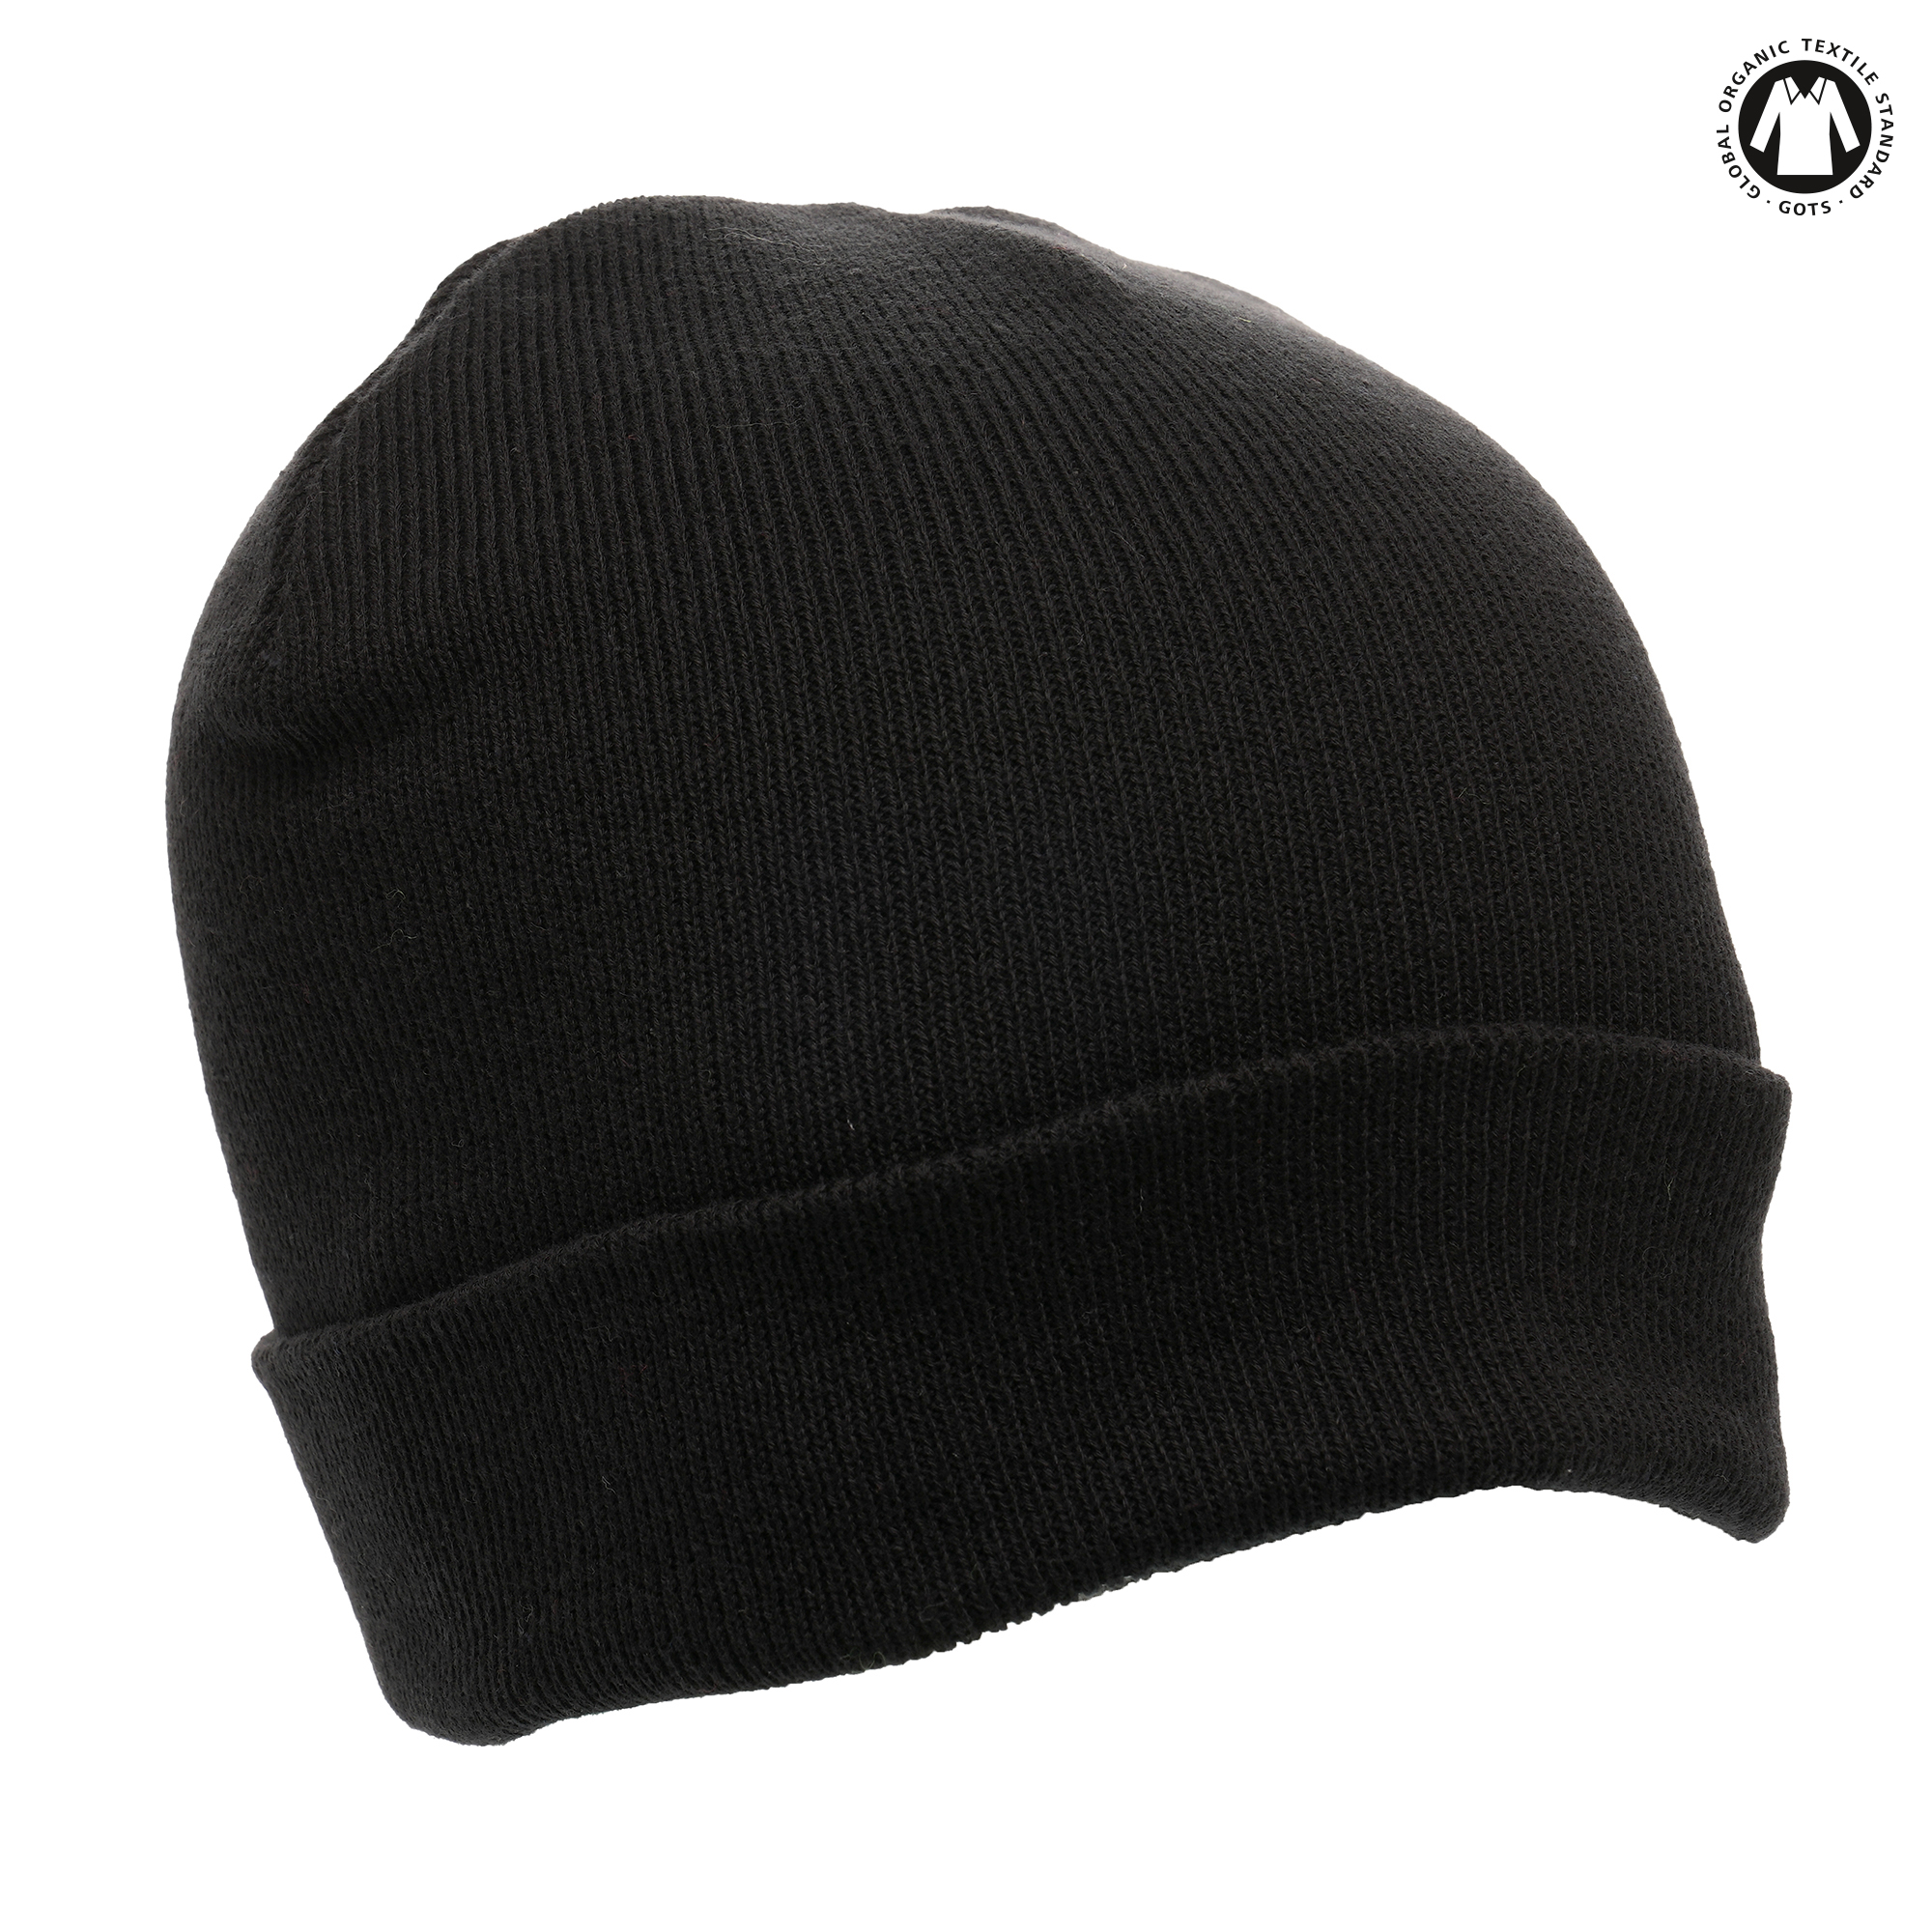 Crafted from 100% organically-sourced cotton, this adult sized beanie is both eco-friendly and fashion-forward. The double layer knit provides warmth and the cuffed design adds a touch of style and allows for optimal decoration. Available in variety of colours.